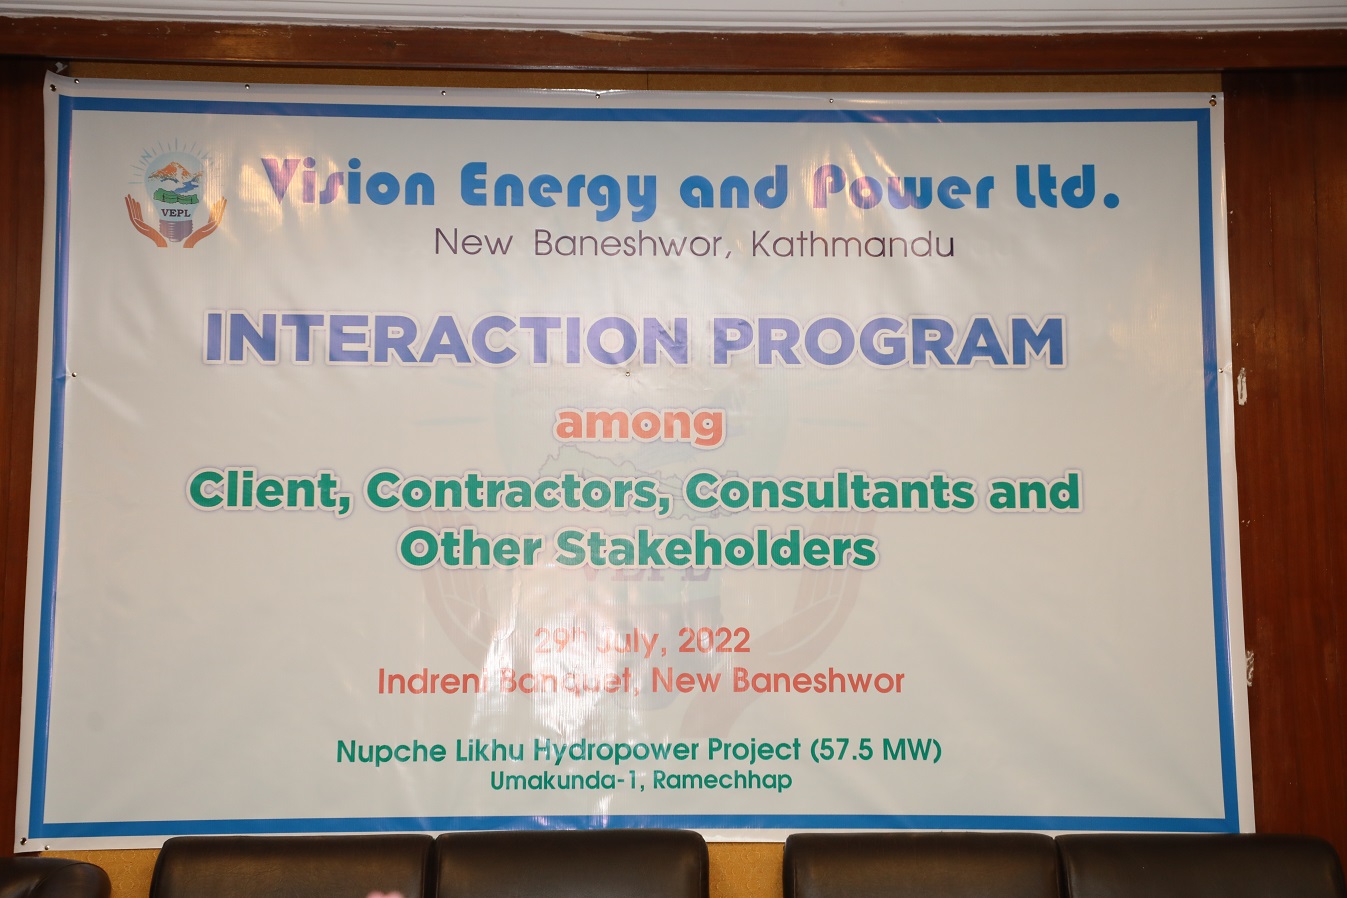 Interaction Program Among Client, Contractors, Consultants and Other Stakeholders